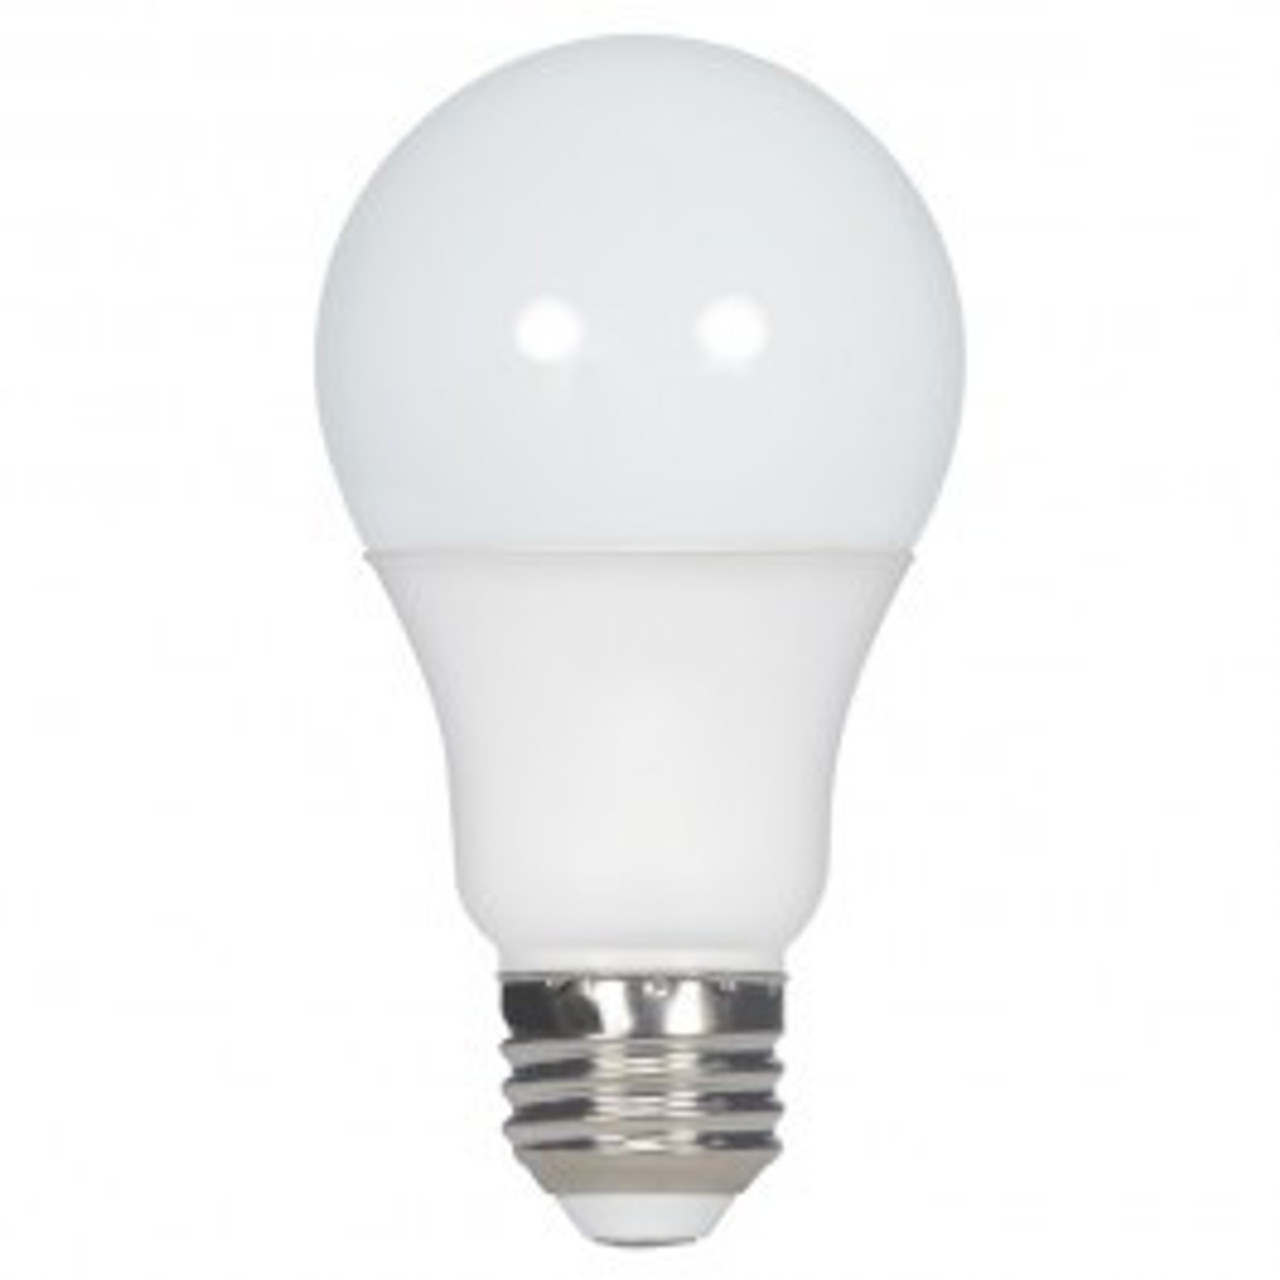 LED A19 LIGHT BULB - Choose Your Wattage and Color Temperature